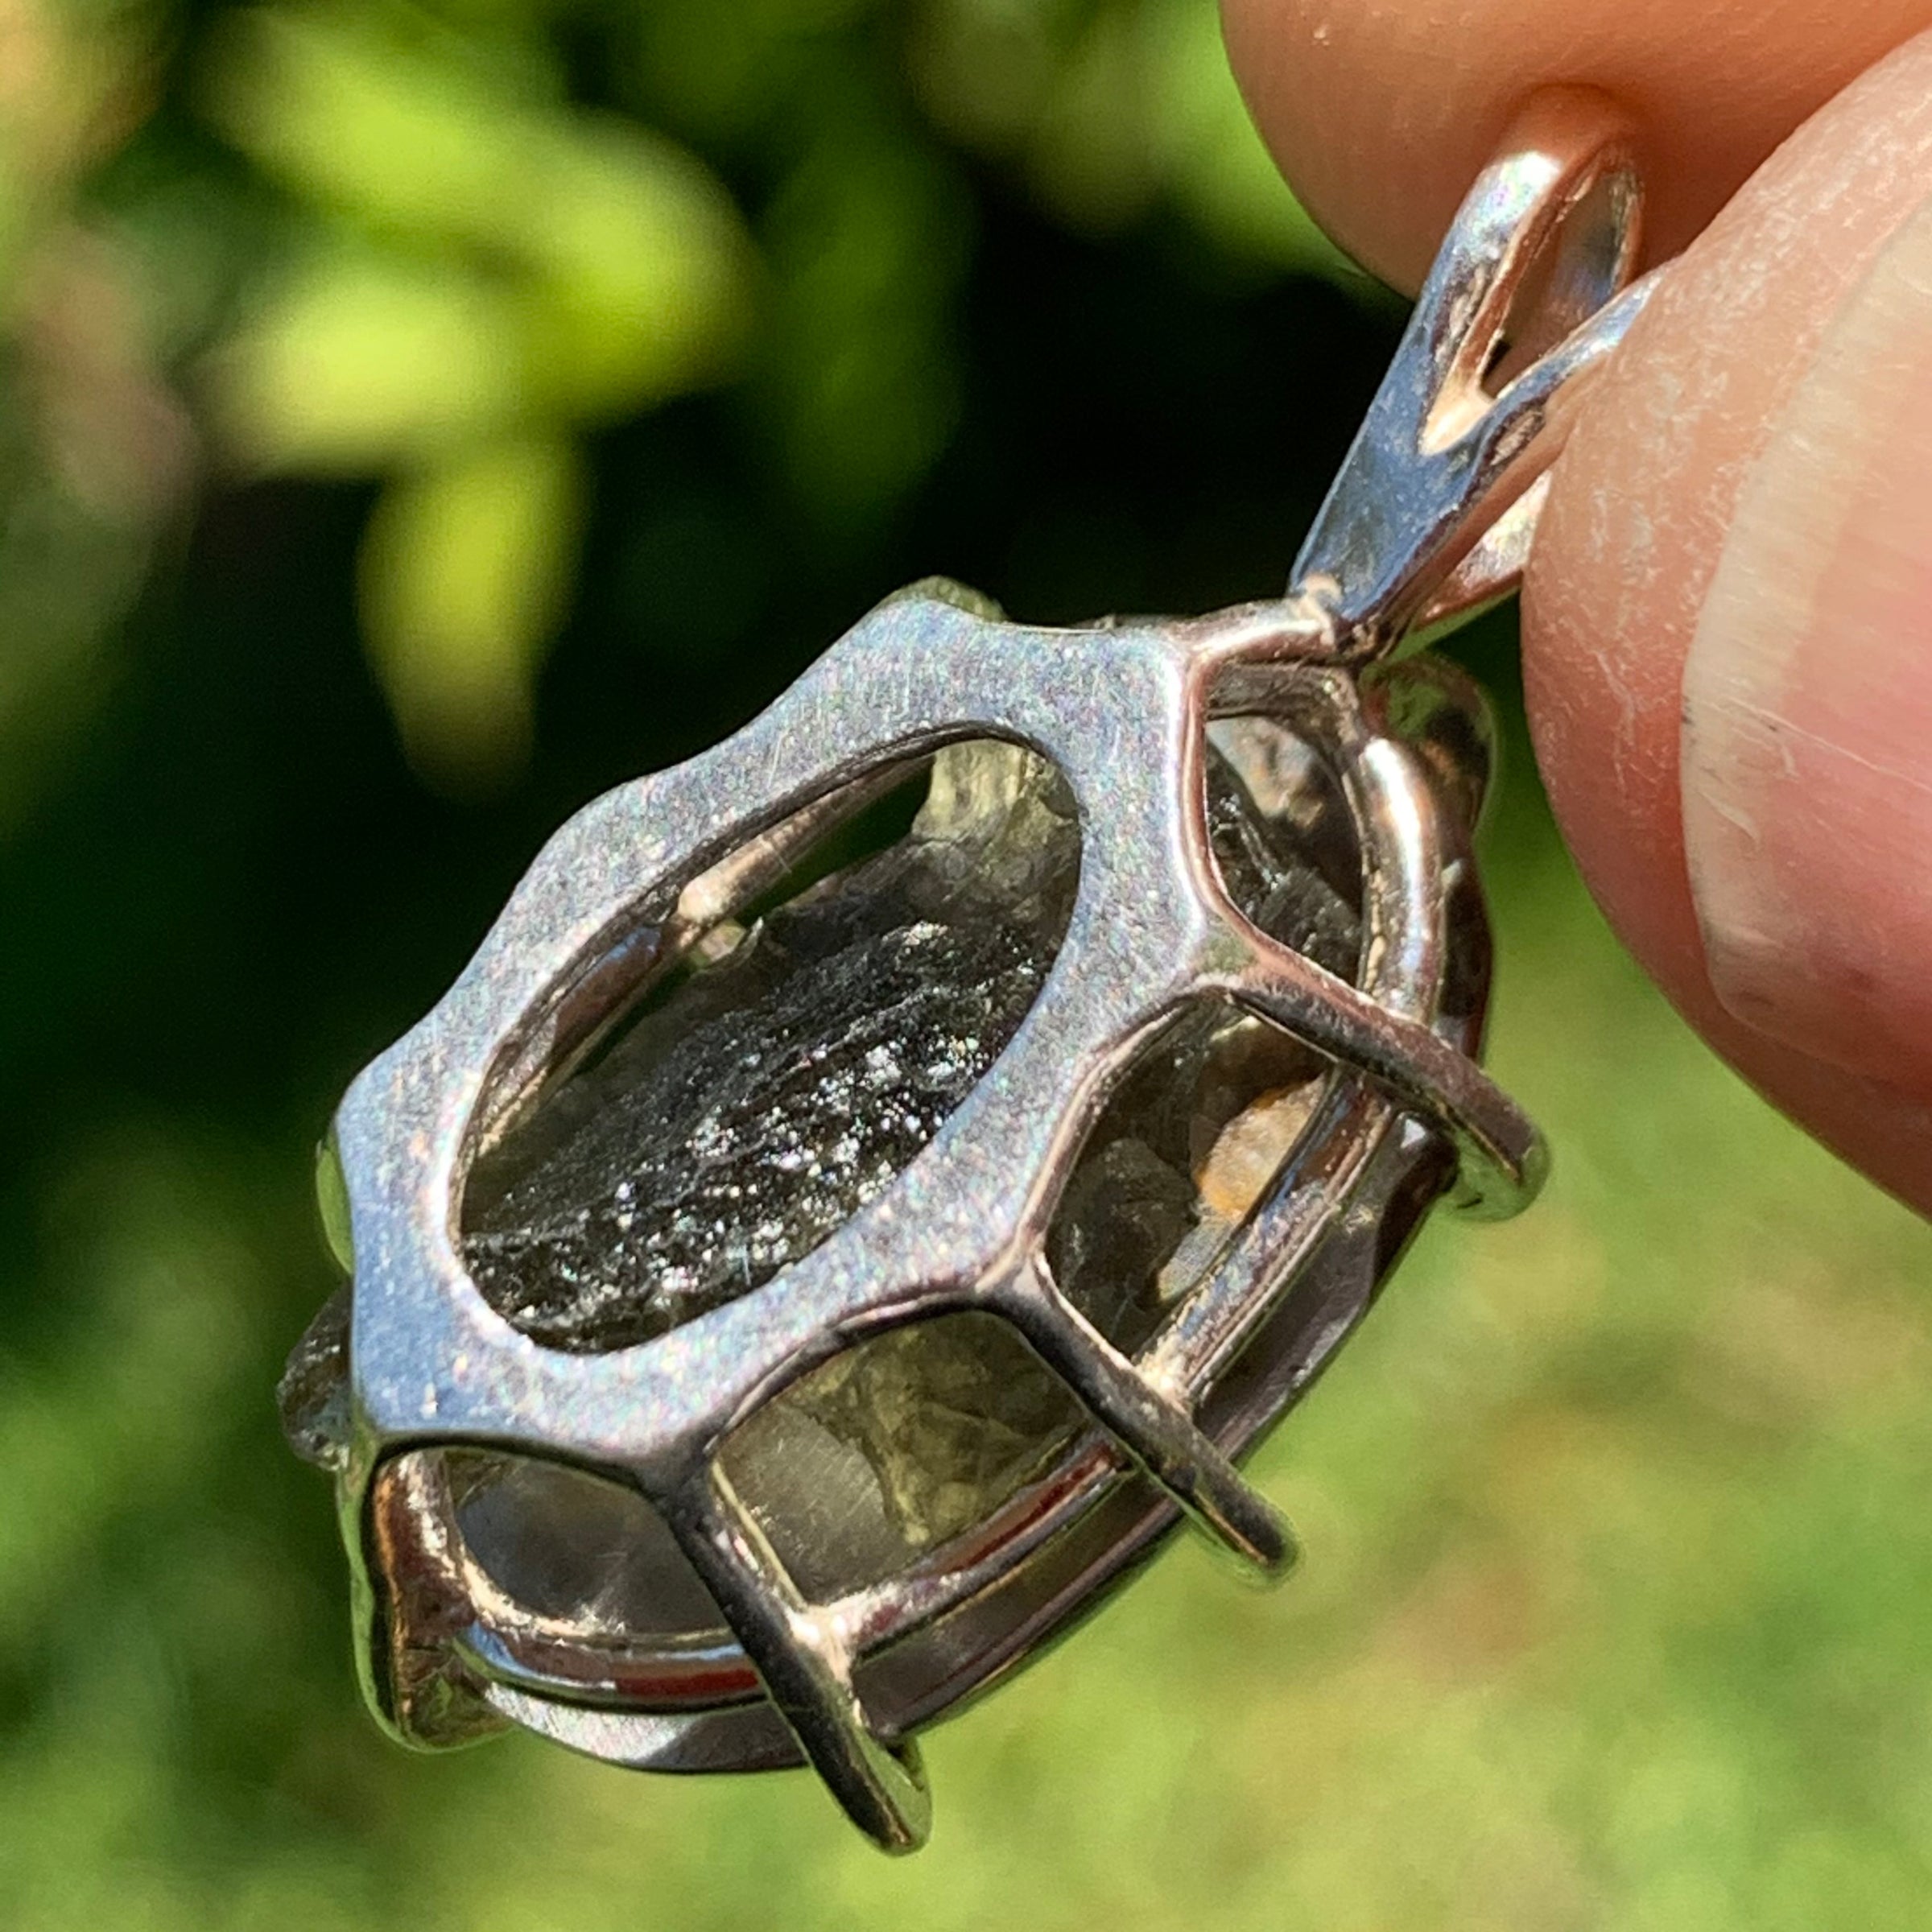 moldavite showing through the backside of a sterling silver sericho pallasite meteorite and raw moldavite tektite basket pendant held up on display to show details